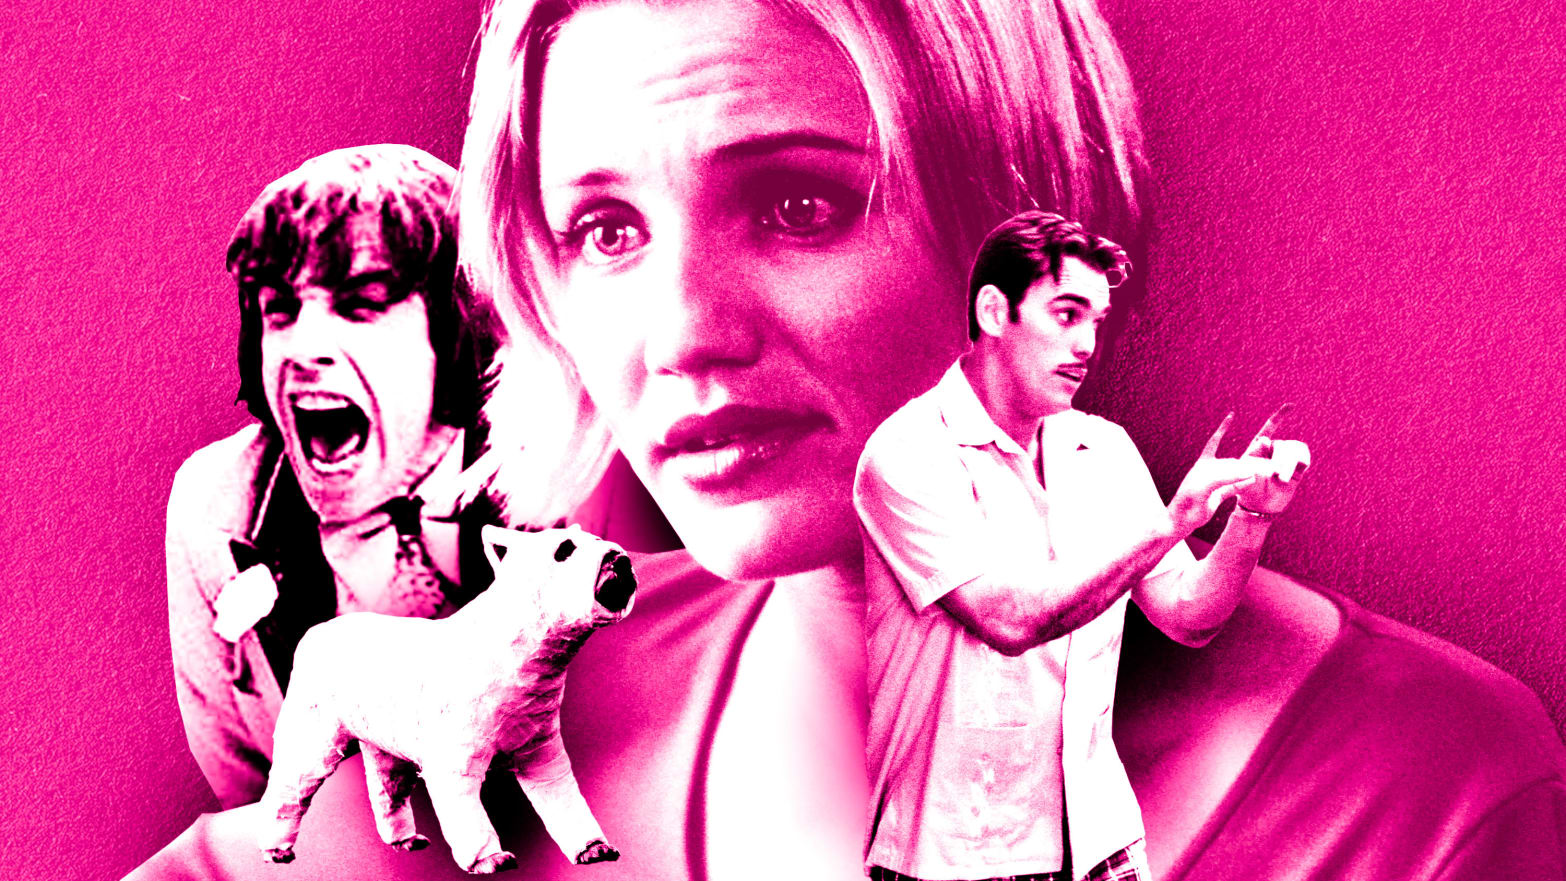 A photo composite of Ben Stiller, Cameron Diaz, and Matt Dillon in ‘There’s Something About Mary'